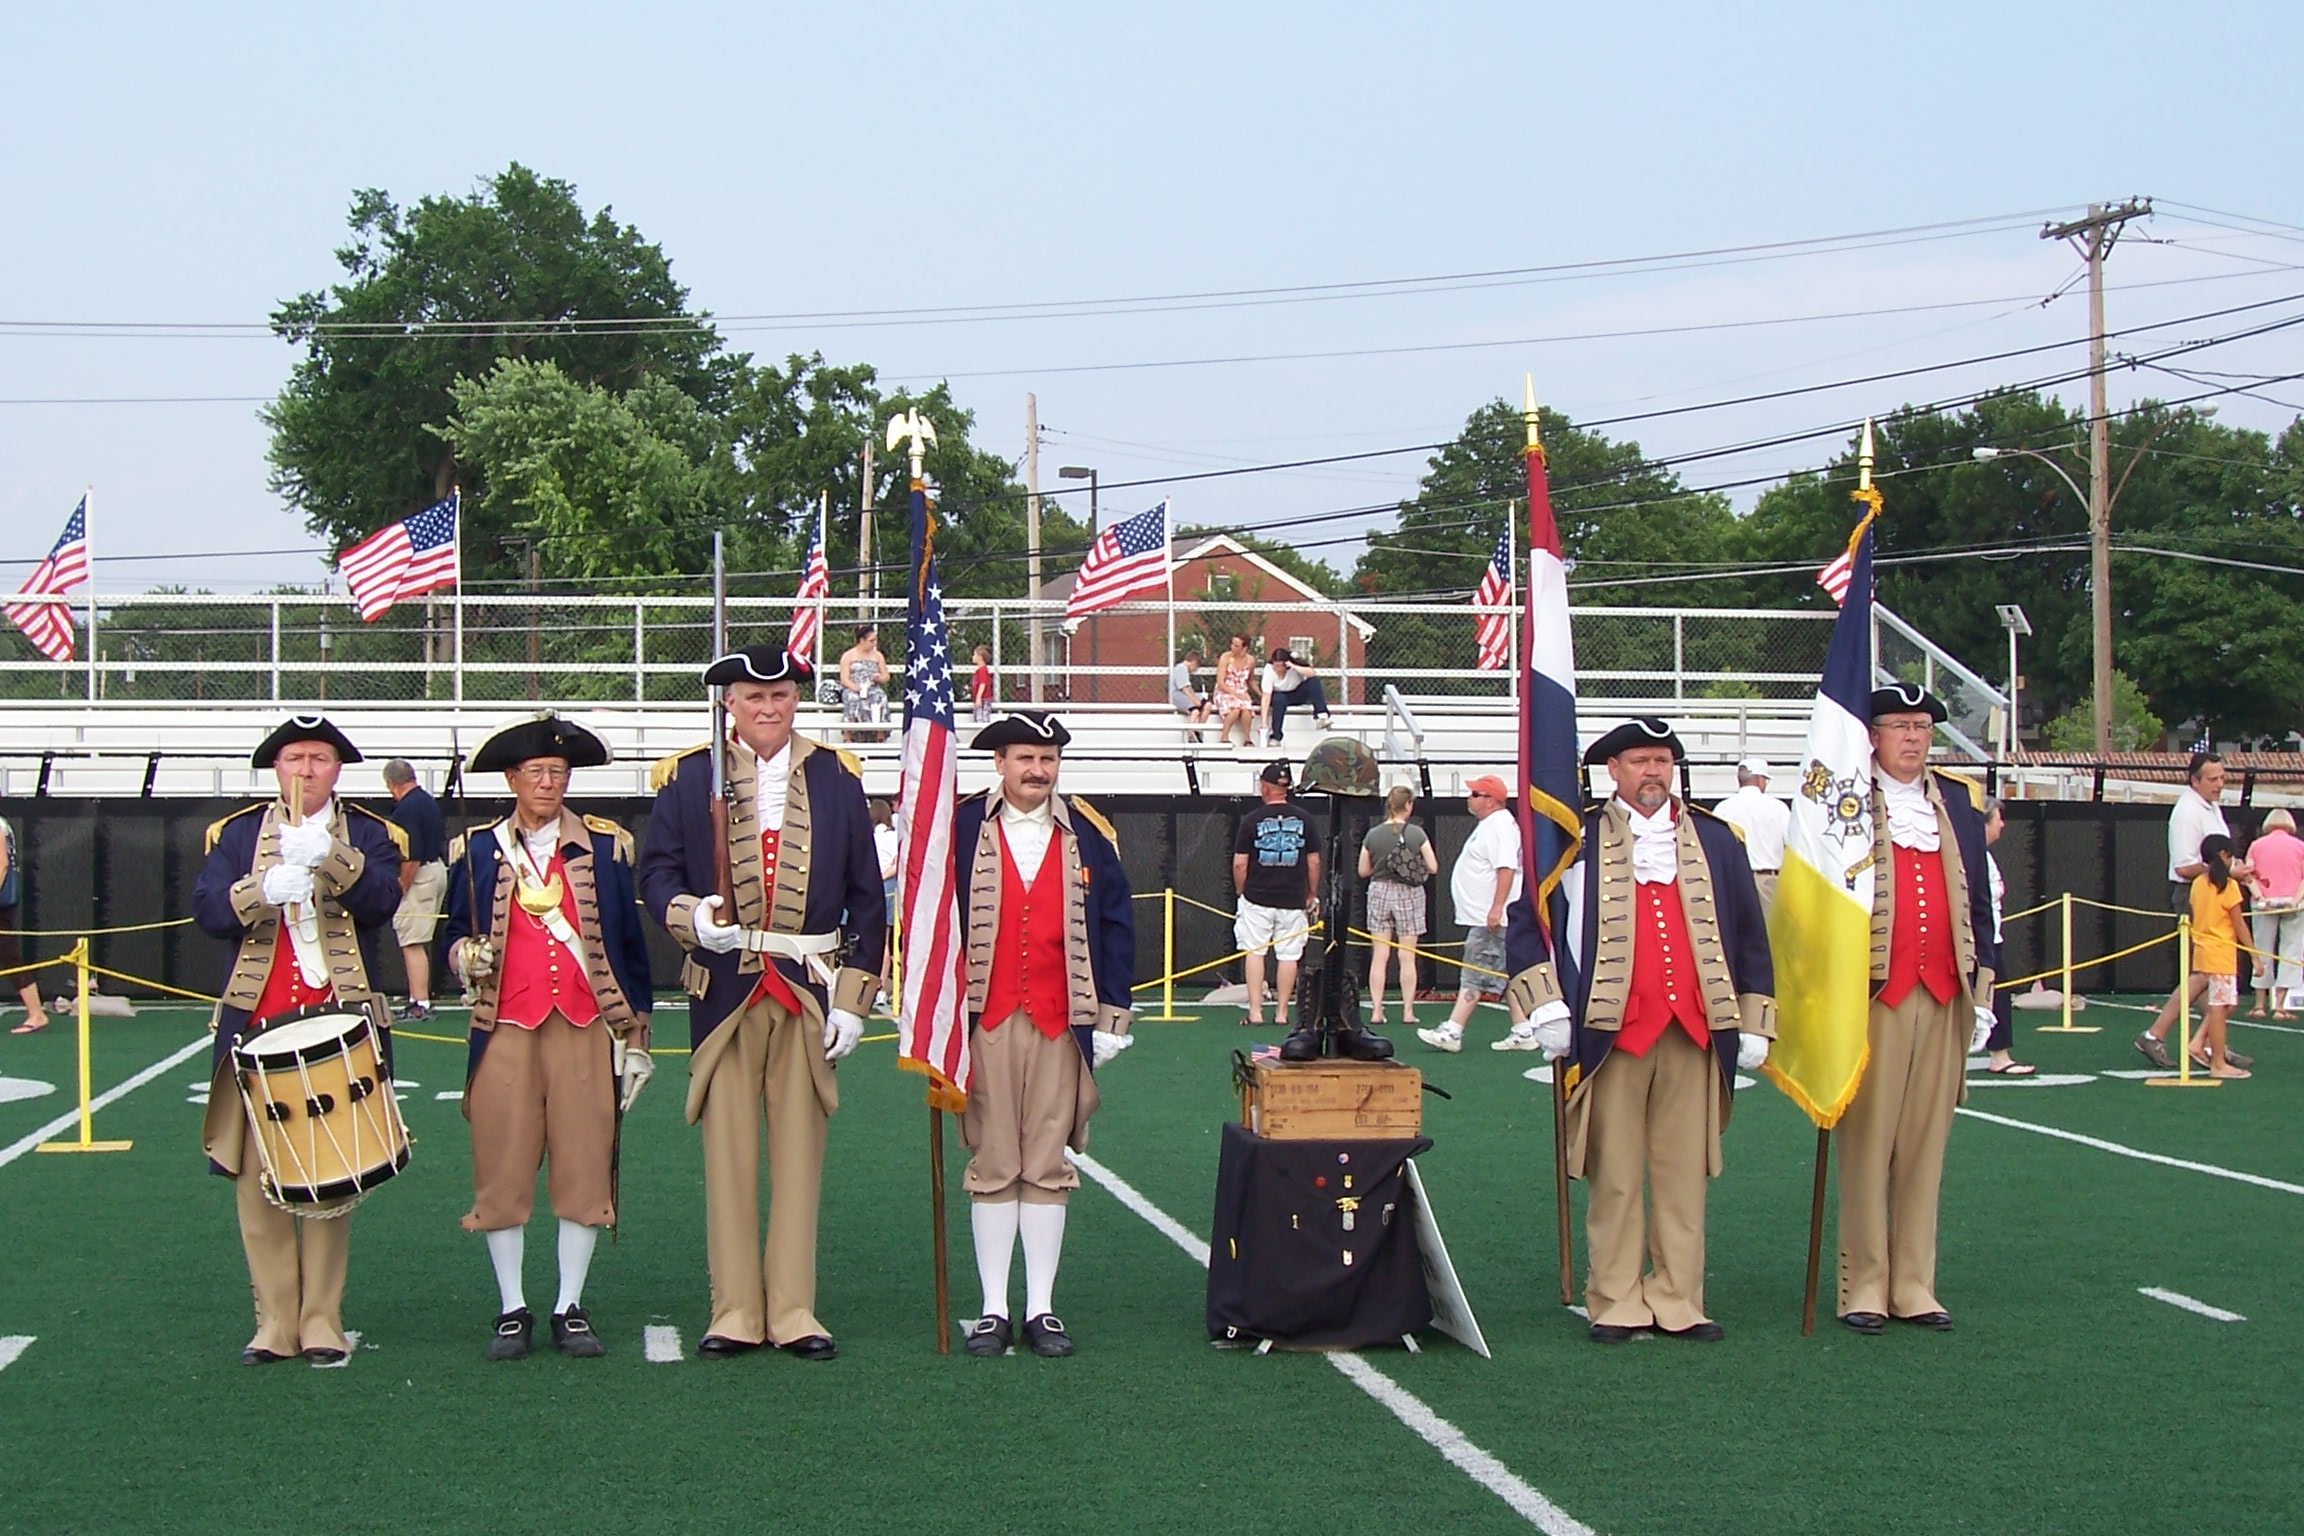 The MOSSAR Color Guard Team participated at the Closing Ceremony each day on June 28 - July 1, 2012 at ''he Wall That Heals'' which was held at North Kansas City High School Footbal Stadium in North Kansas City, MO. It is estimated that over 15,000 people attended this event over the four day period.